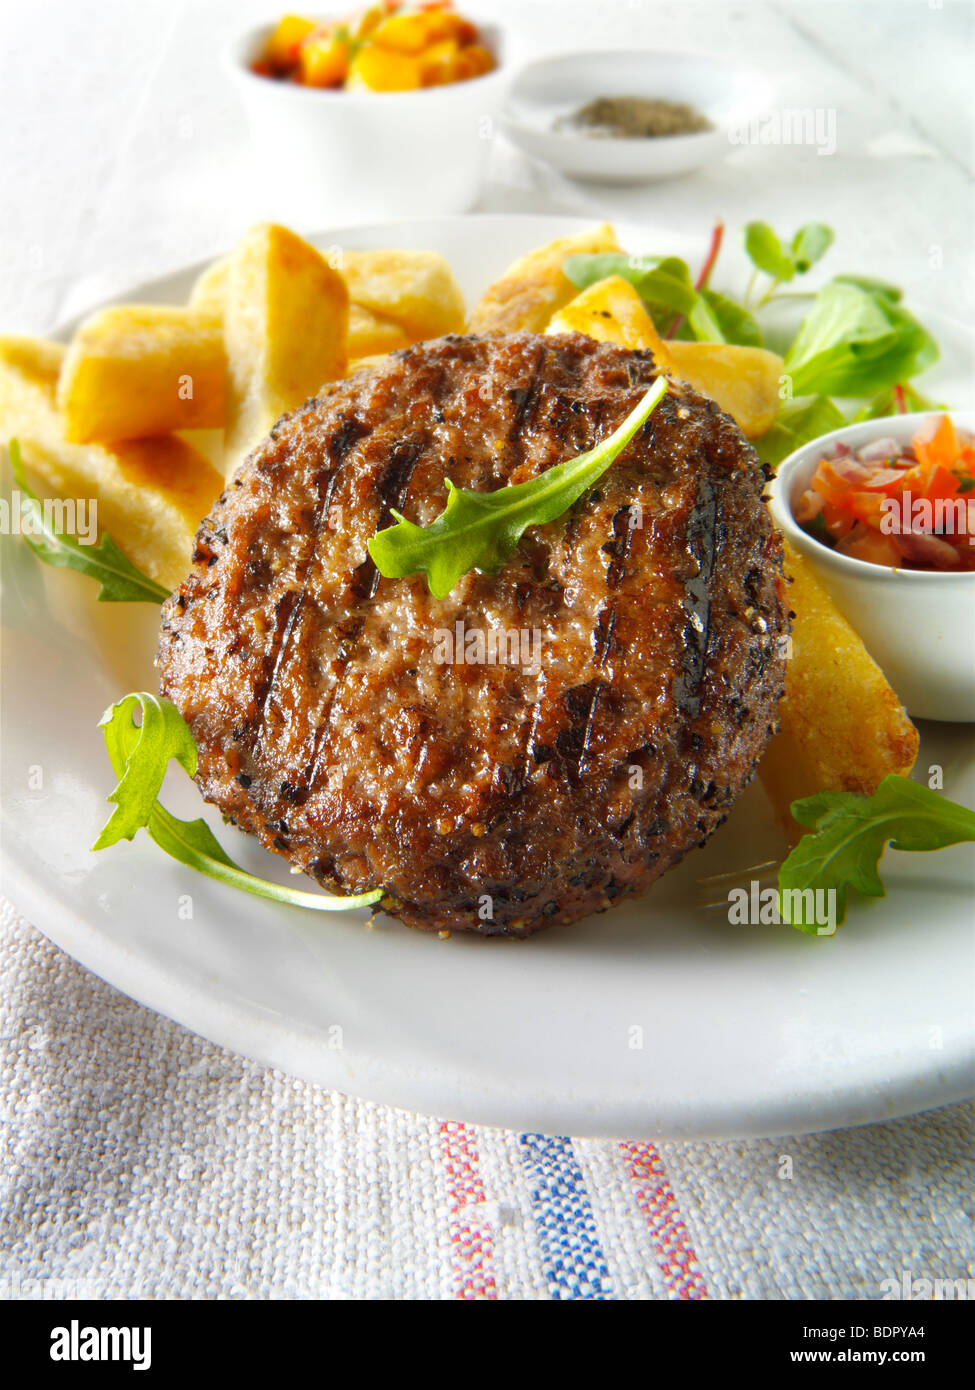 Char grilled beef burger with chunky chips and salad Stock Photo